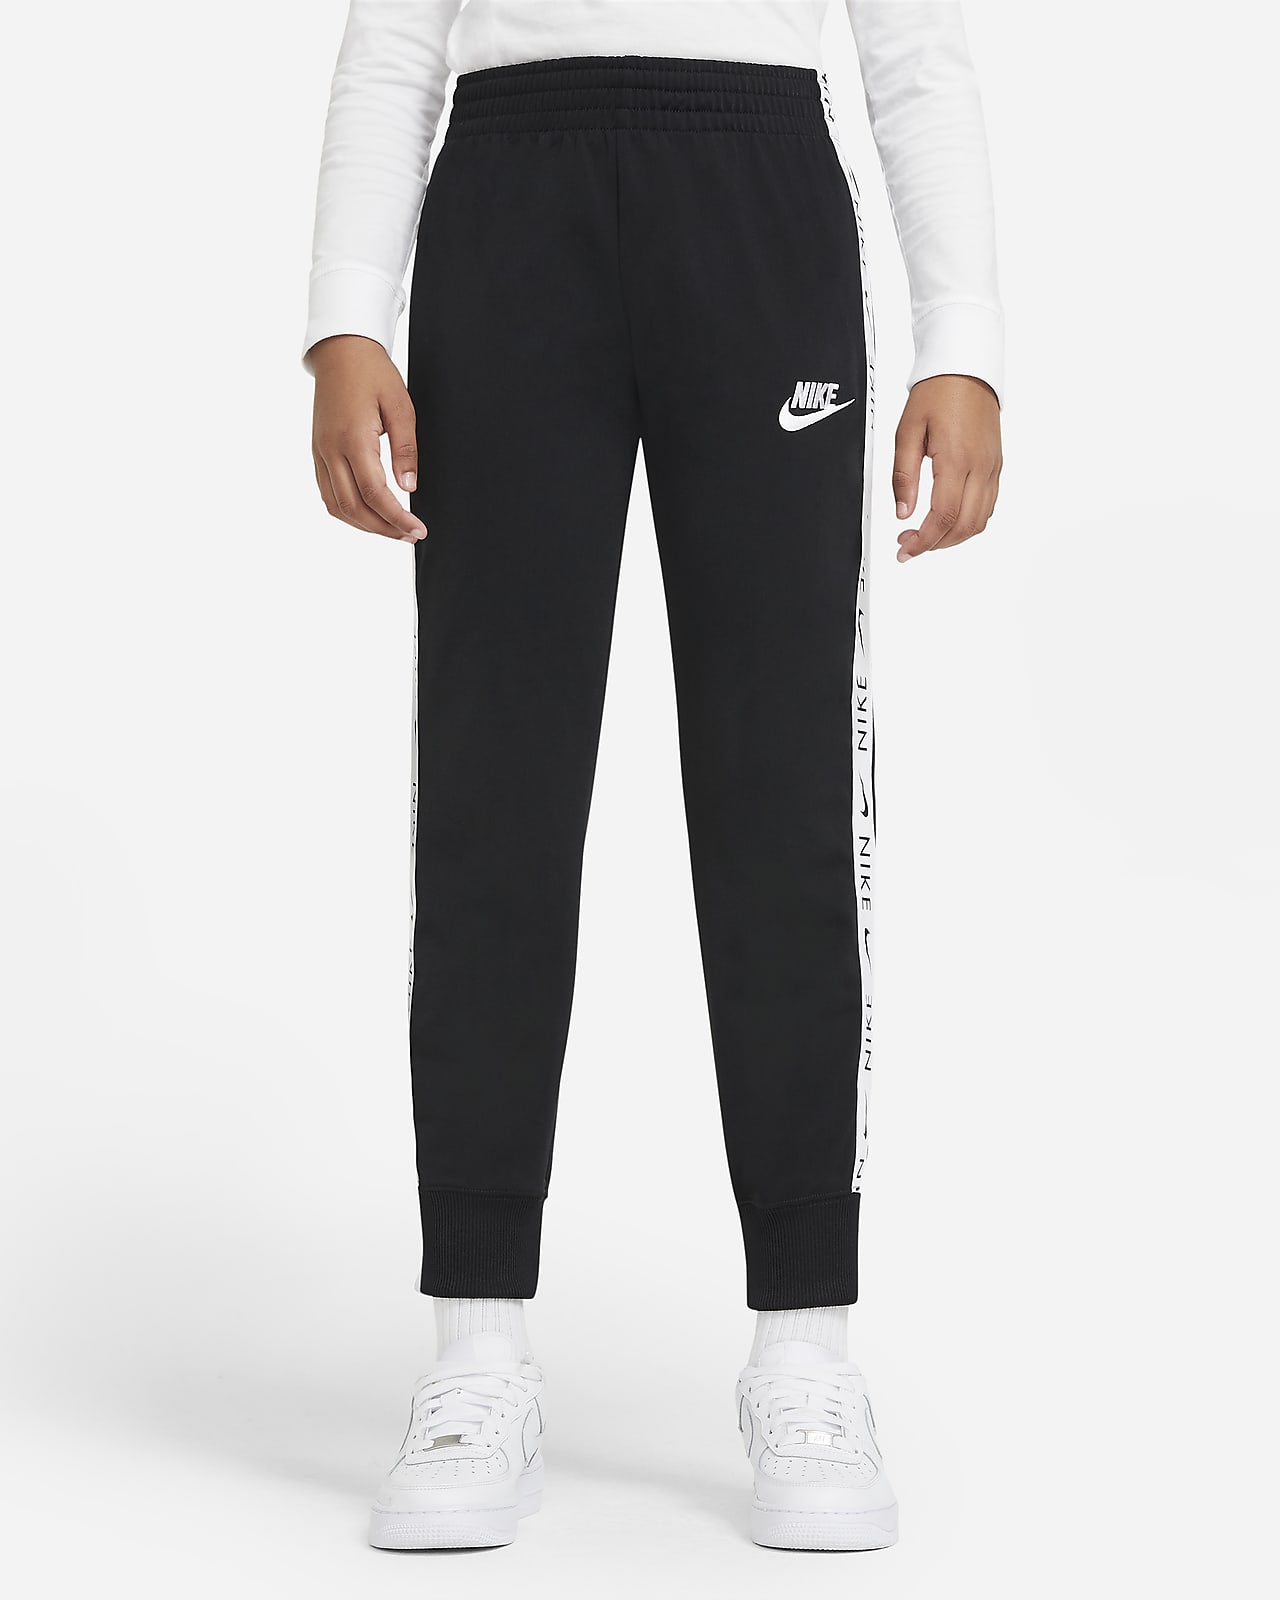 https://static.nike.com/a/images/t_PDP_1280_v1/f_auto,q_auto:eco/cc61b321-03e8-4b9b-81c4-b7c6e395a3dd/sportswear-older-tracksuit-jHxTp6.png